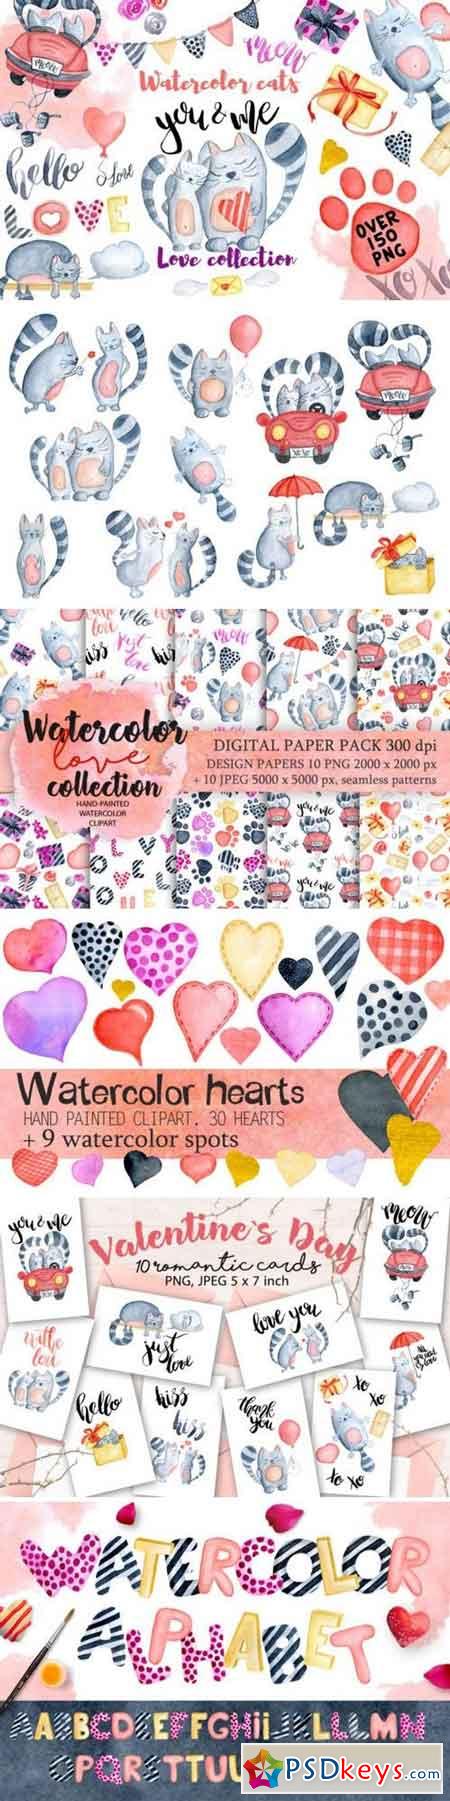 Watercolor Valentines day cats 1179103